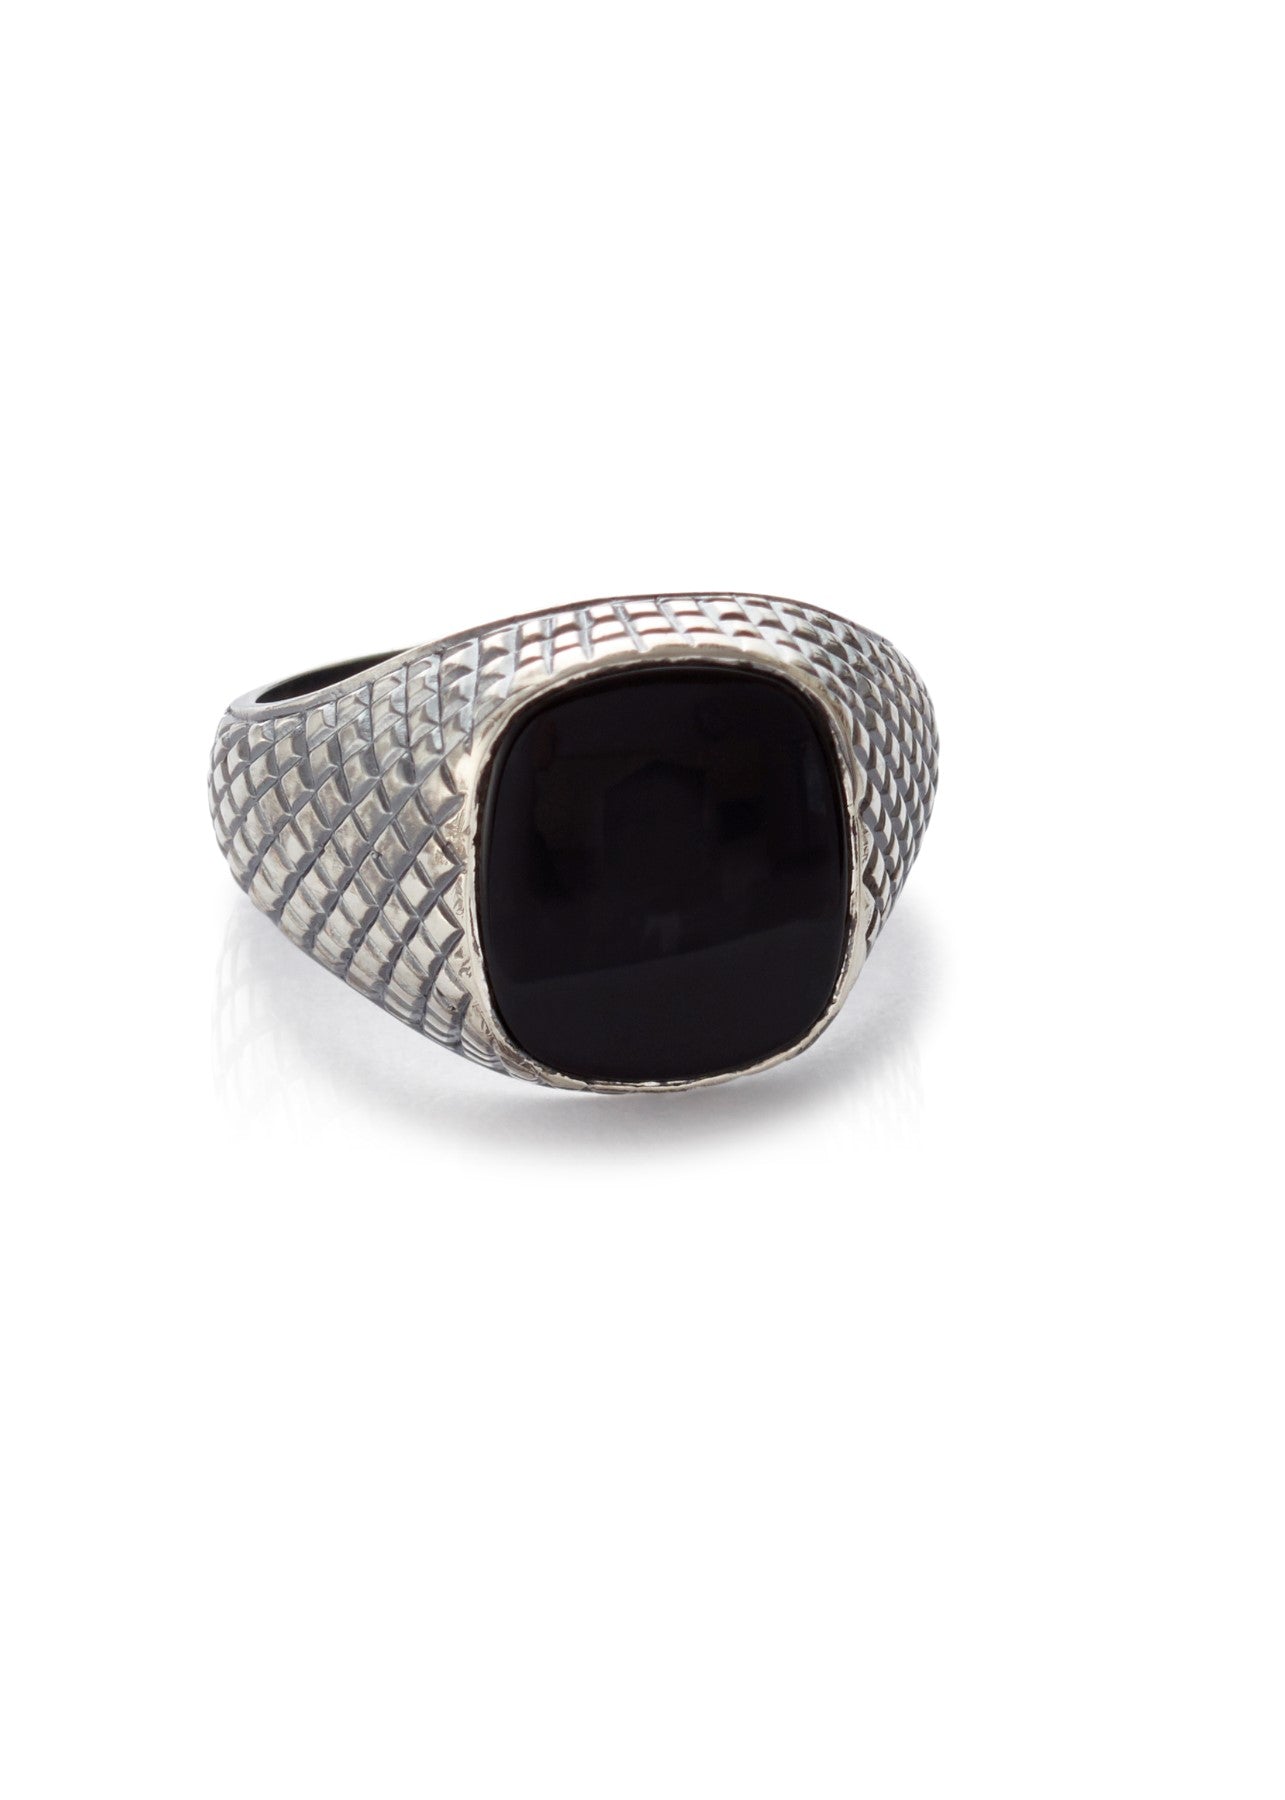 Unisex ring with Onyx in oxidized silver